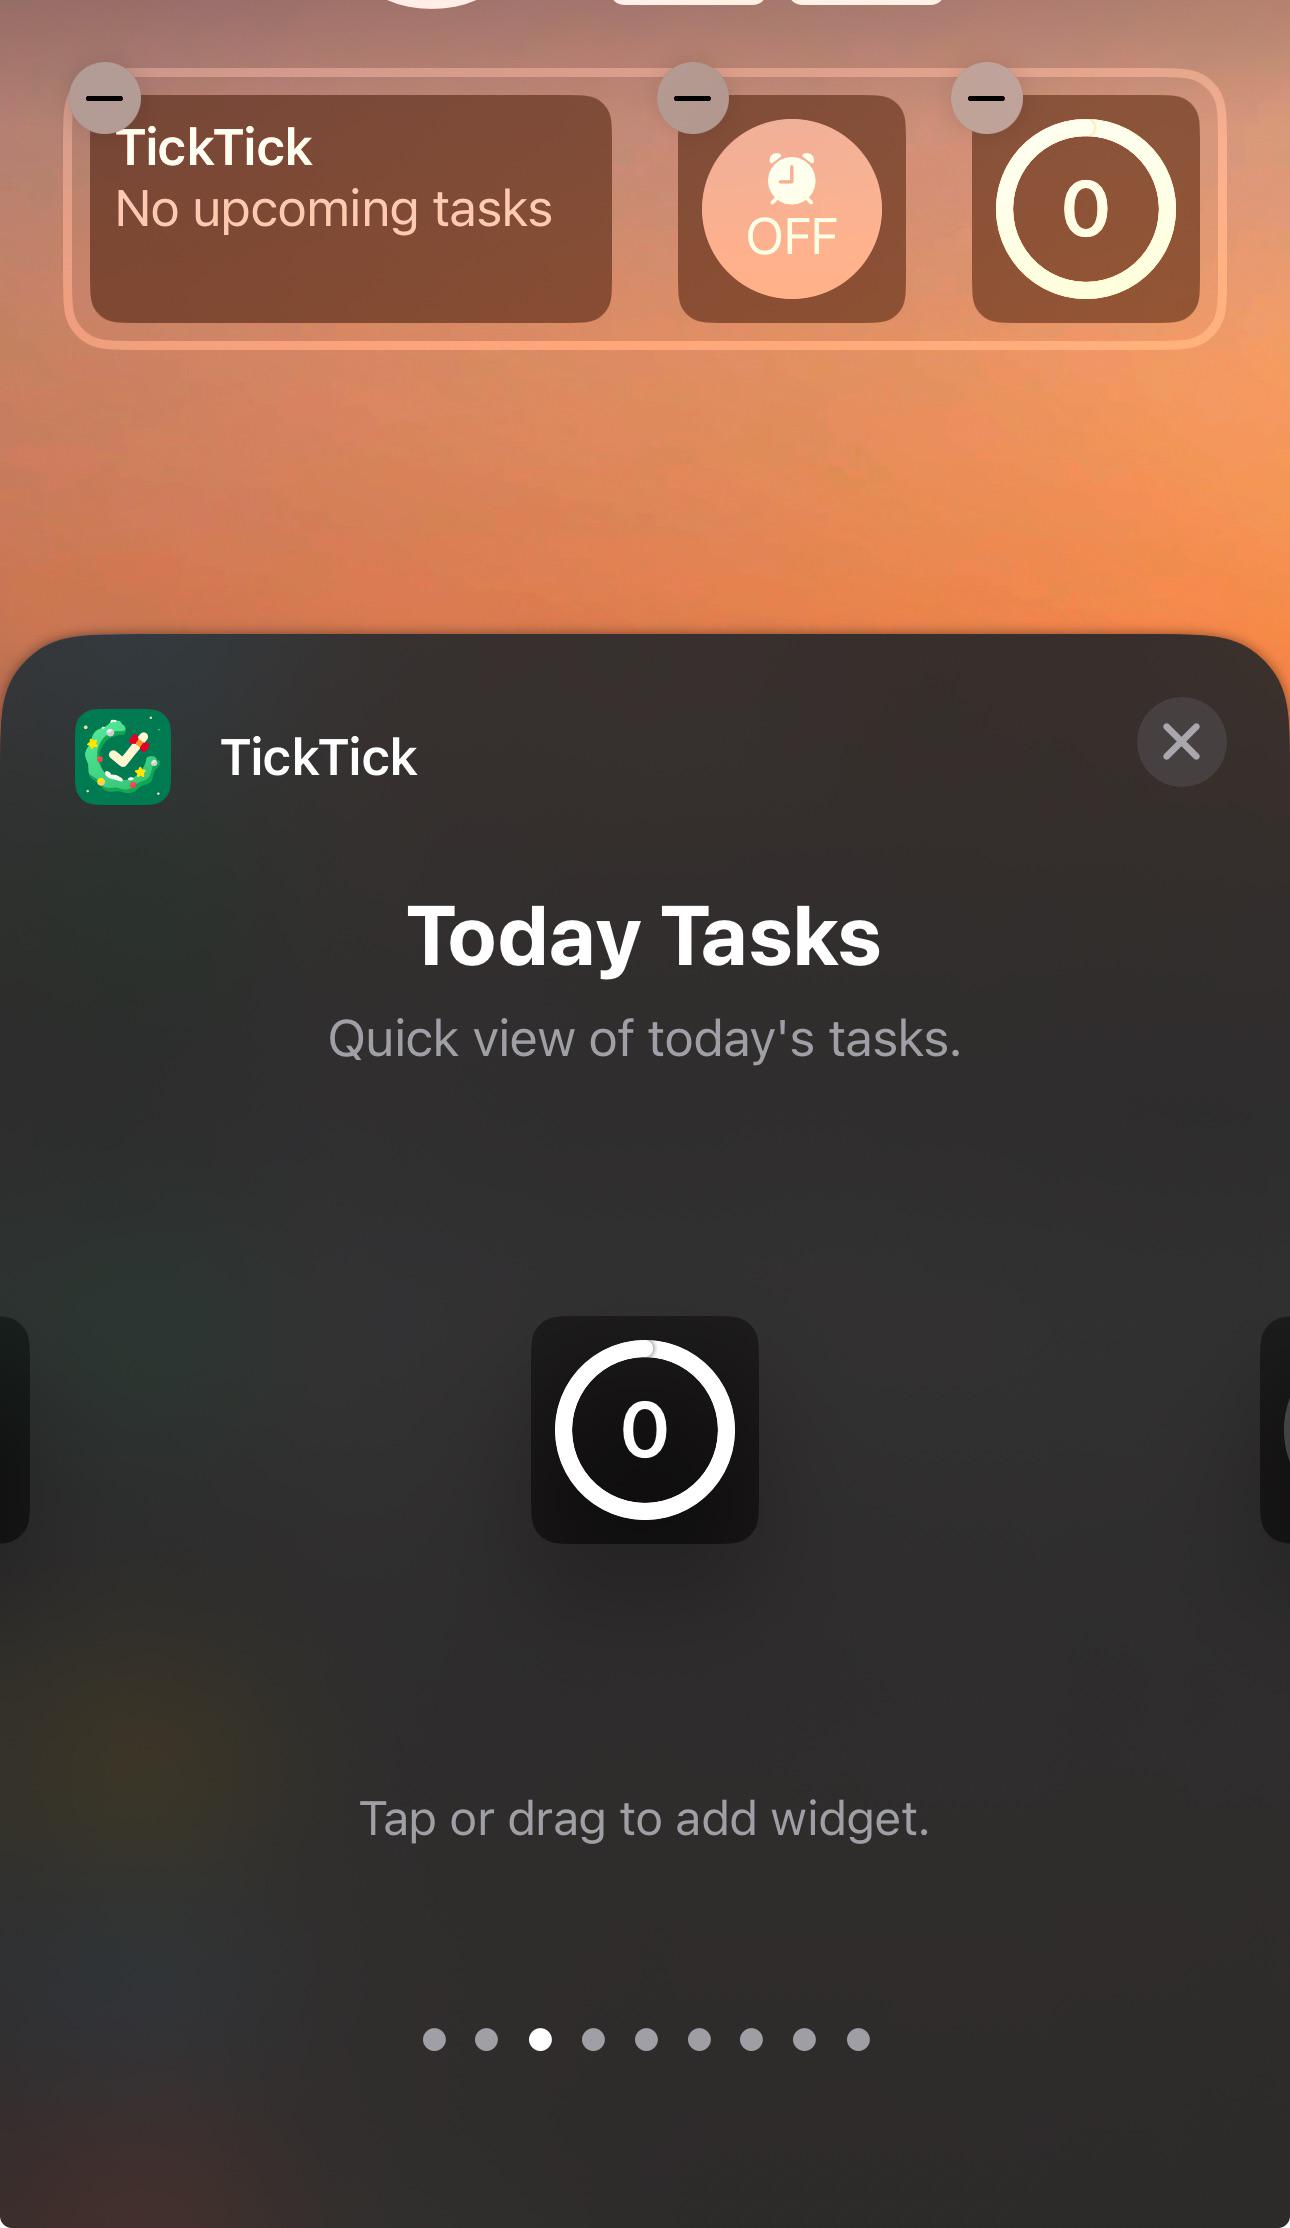 r/ticktick - Anyone want it show overdue along with today task too? It’s will be easier:)